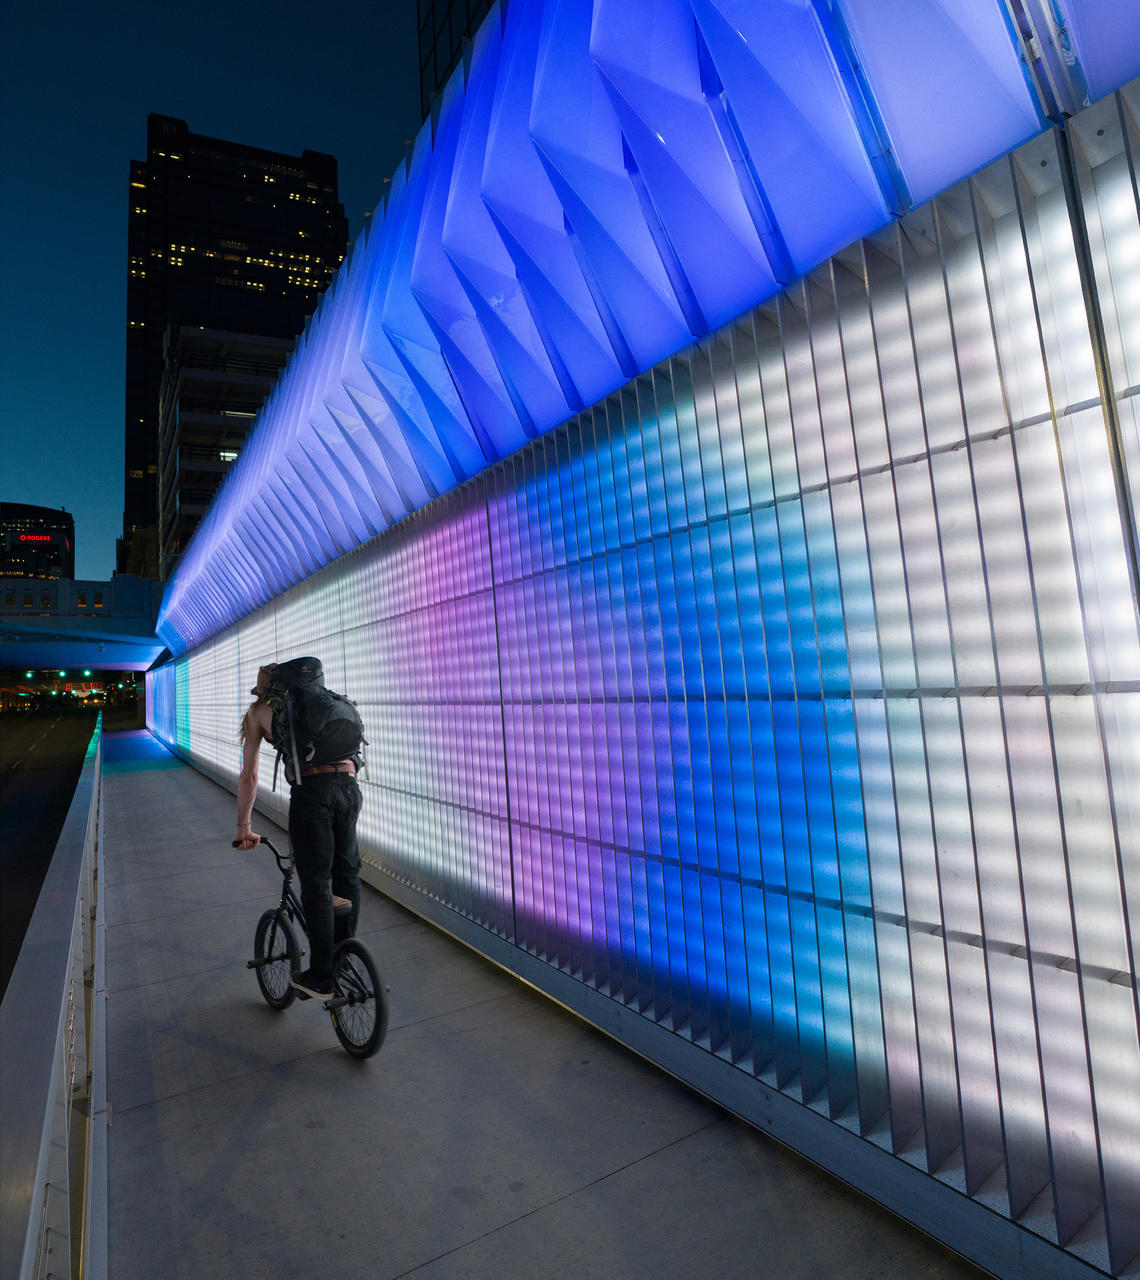 All lit up, a bicyclist moves through the underpass at night.